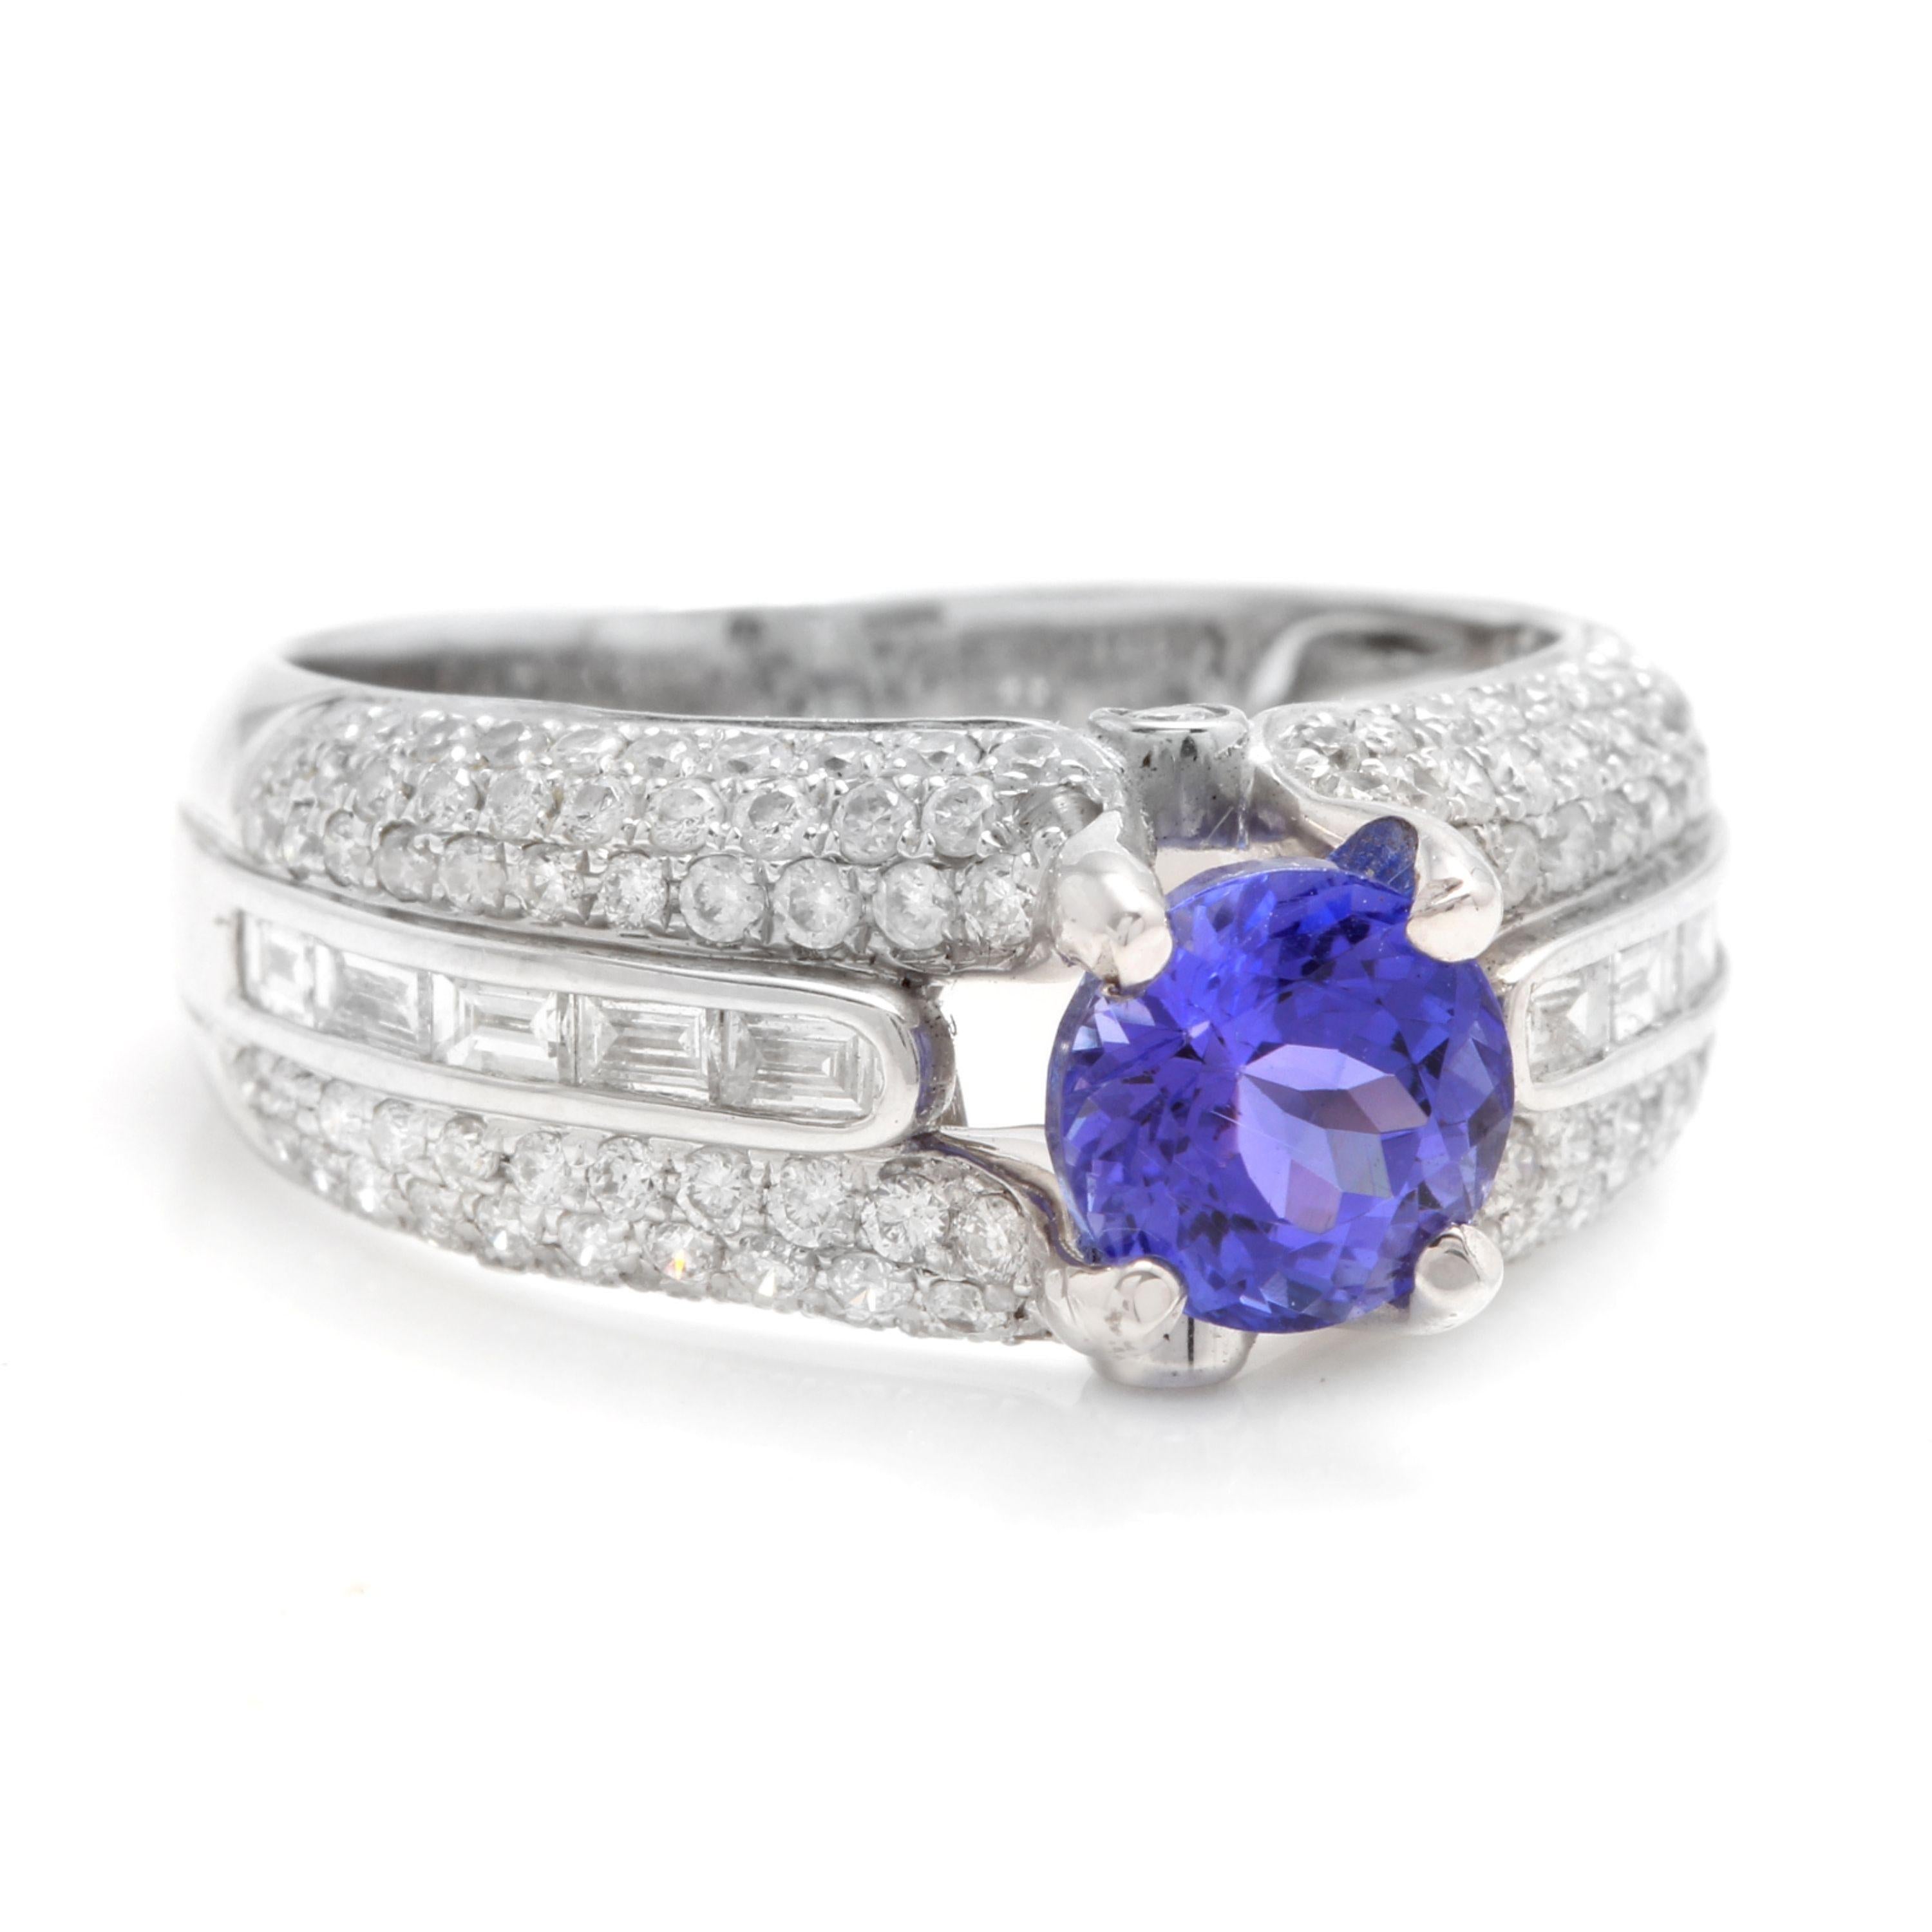 2.60 Carats Natural Very Nice Looking Tanzanite and Diamond 18K Solid White Gold Ring

Total Natural Round Cut Tanzanite Weight is: Approx. 1.60 Carats

Tanzanite Measures: Approx. 6.30mm

Tanzanite Treatment: Heating

Natural Round & Baguette